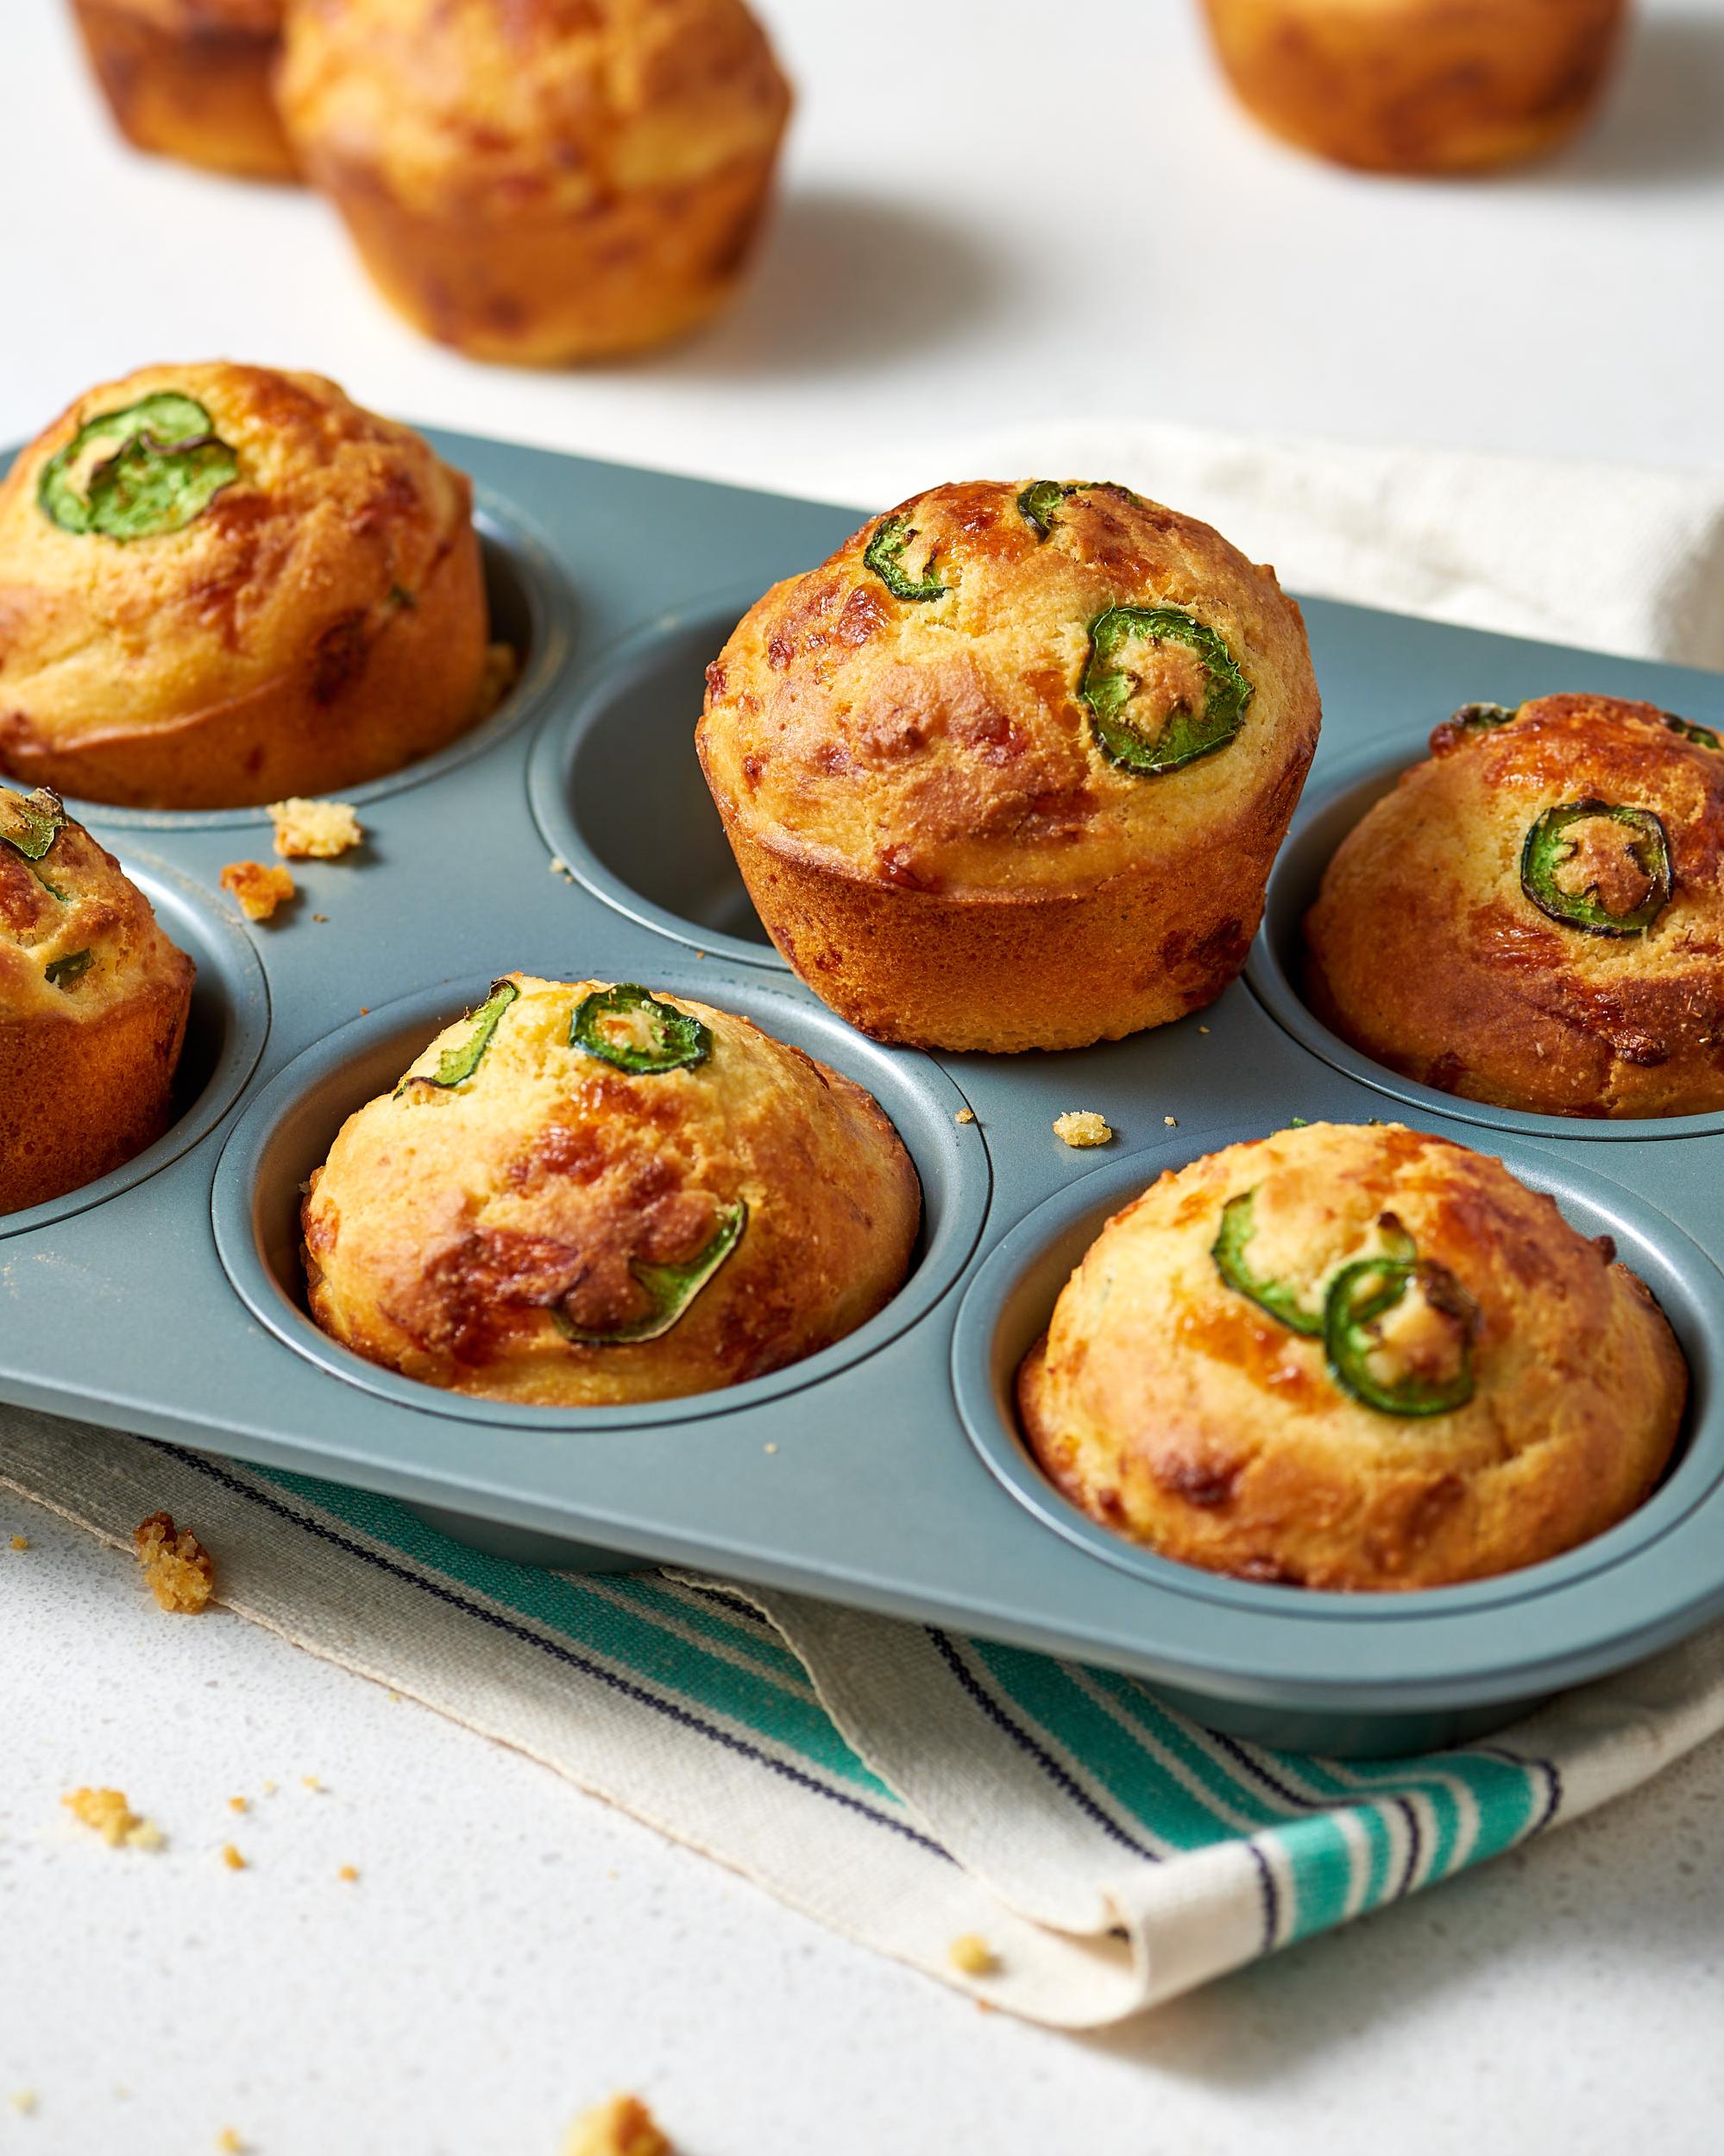  These moist and fluffy muffins are sure to be a hit with any brunch crowd.